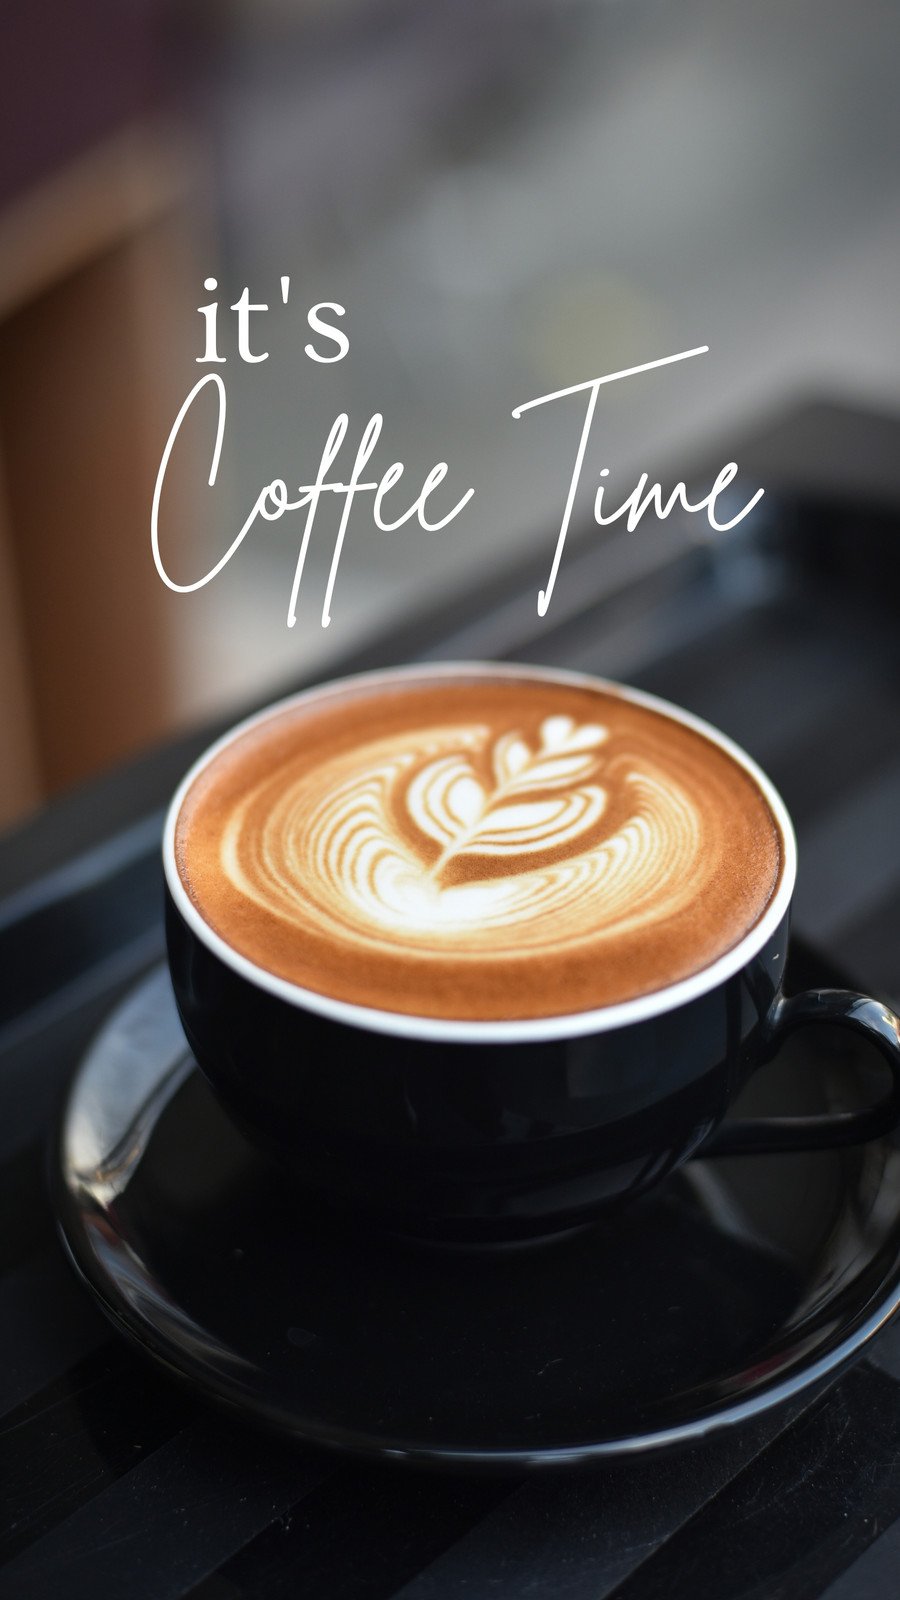 Coffee Aesthetic Wallpaper Illustration Images  Free Photos PNG Stickers  Wallpapers  Backgrounds  rawpixel